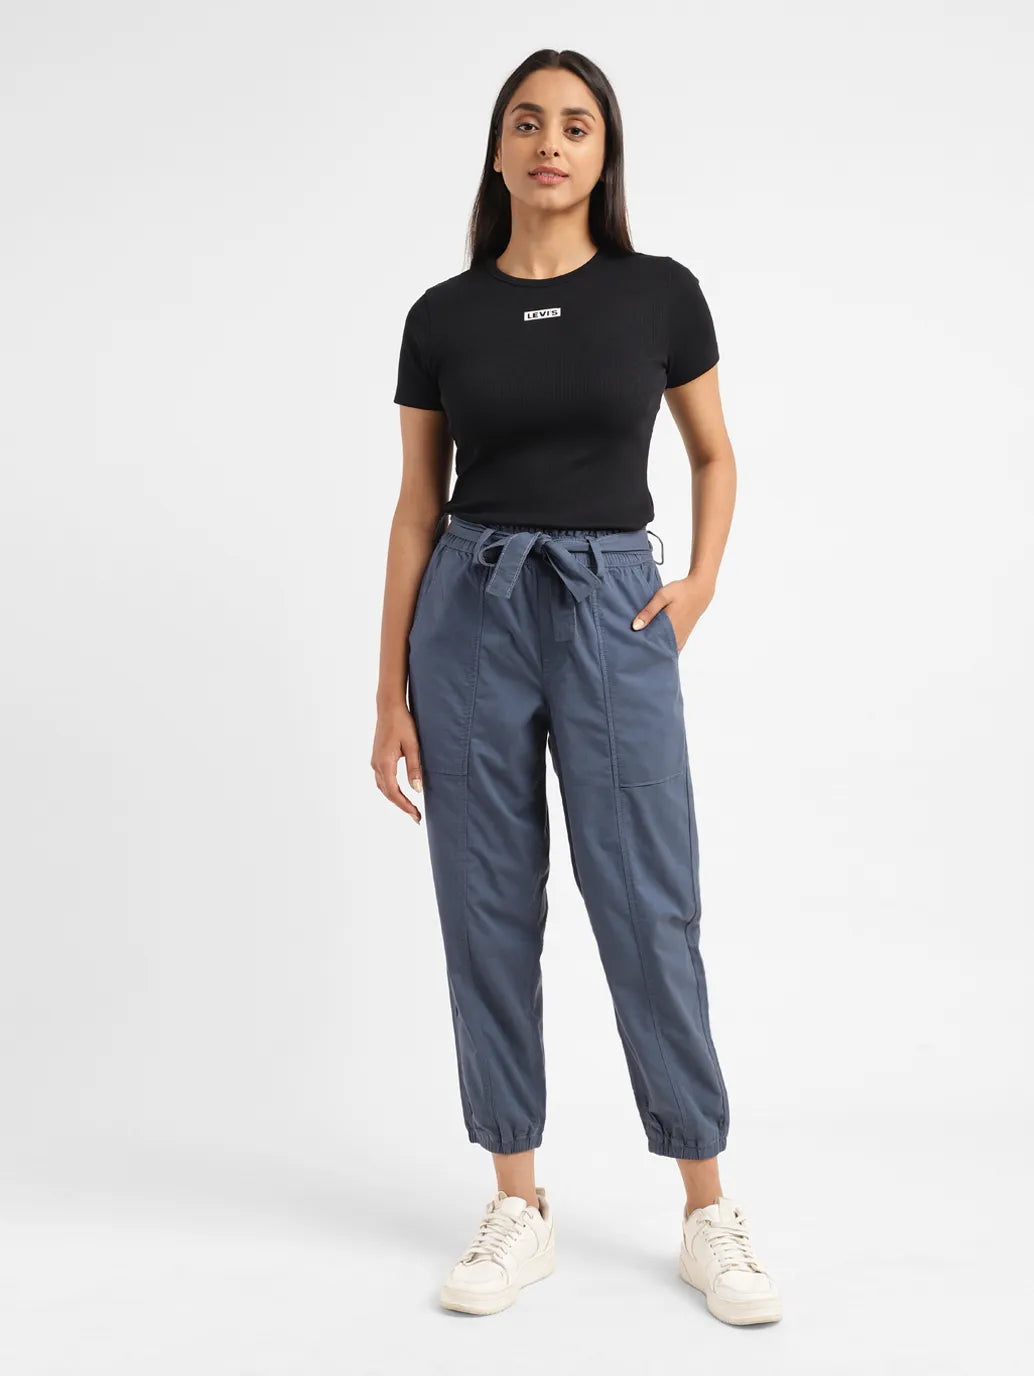 Women's High Rise Black Regular Fit Joggers – Levis India Store